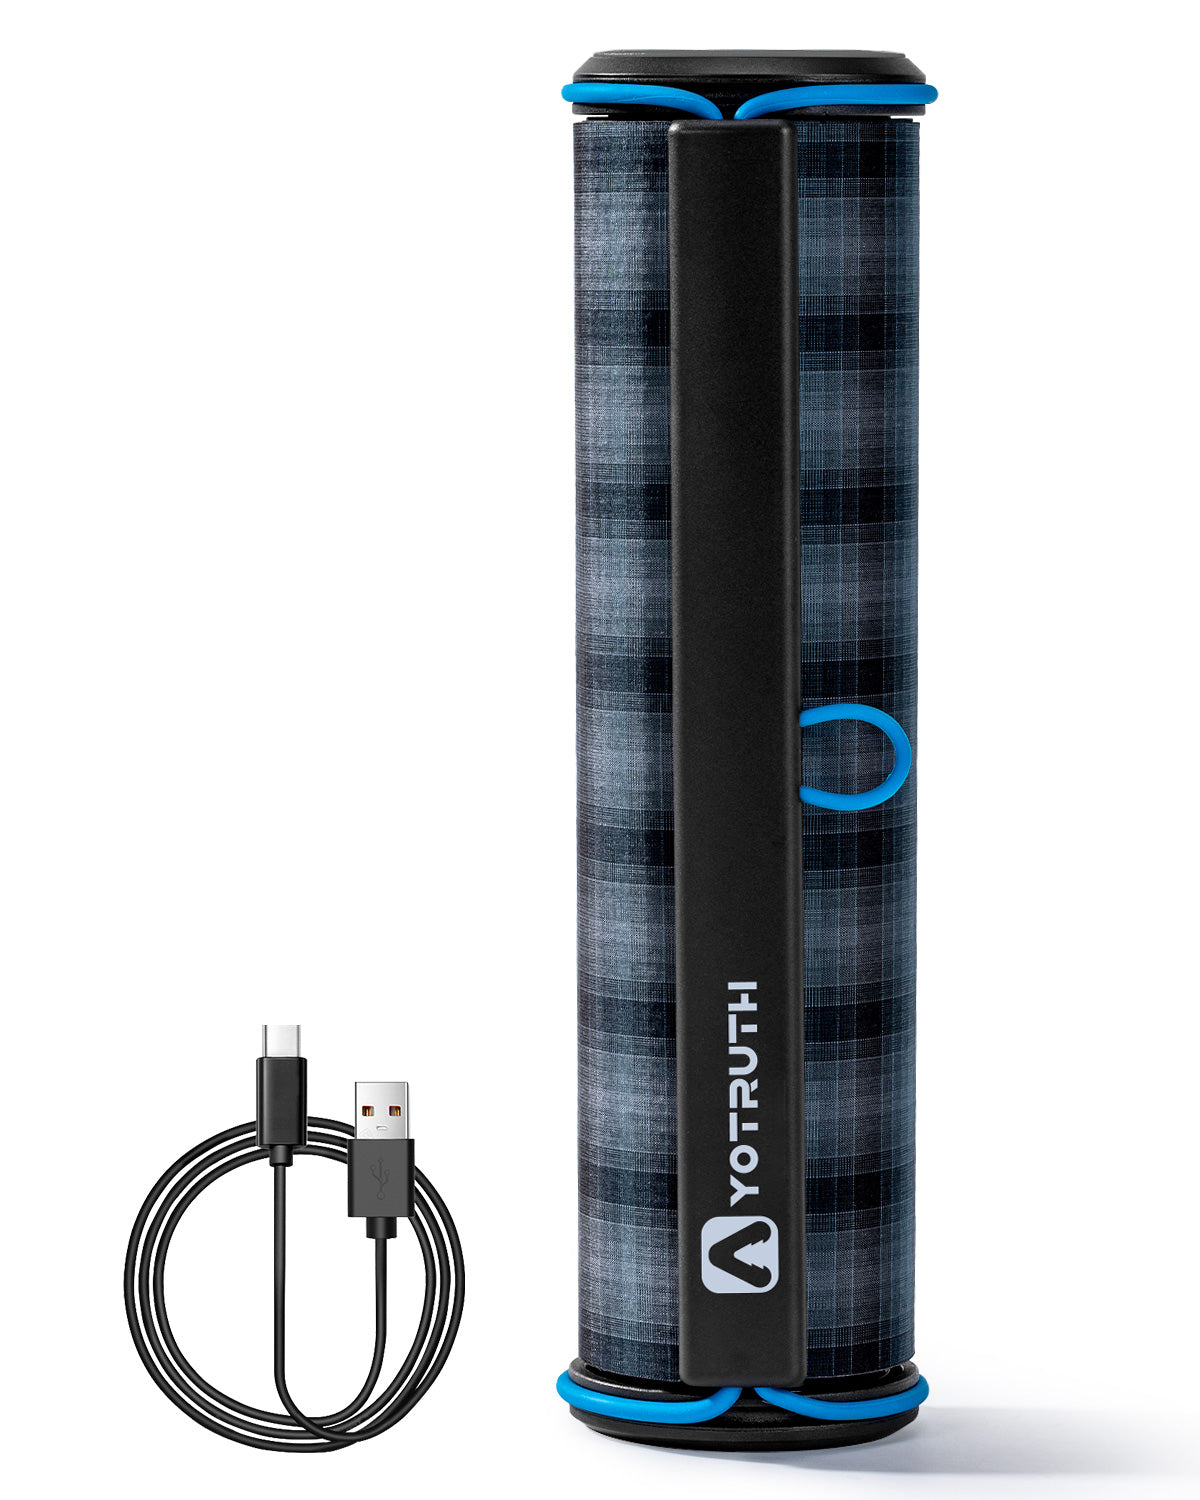 Rolled up Yotruth XR-10 Solar Power Bank with its accompanying charging cable